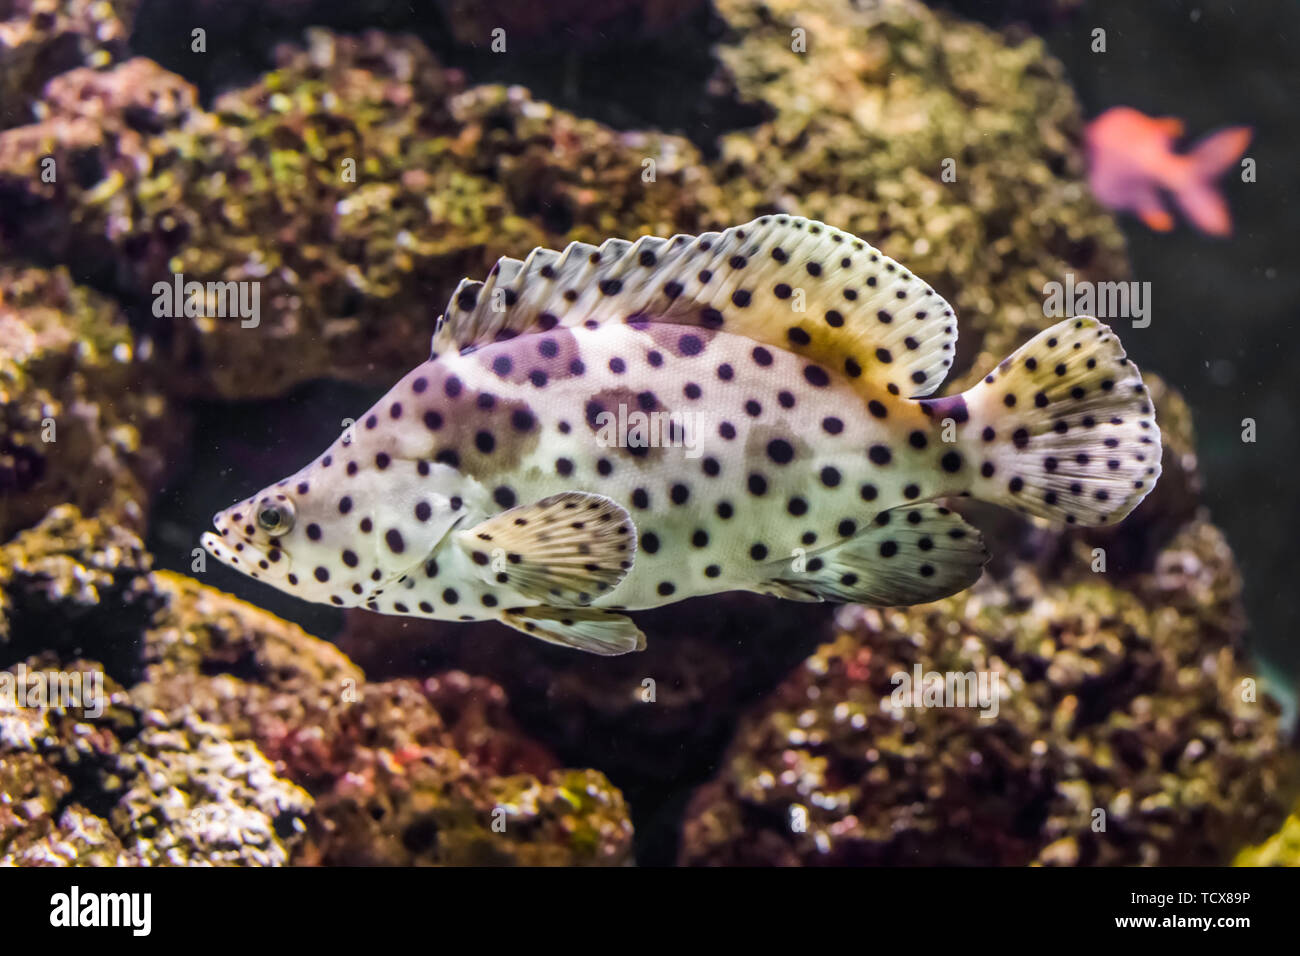 https://c8.alamy.com/comp/TCX89P/closeup-of-a-panther-grouper-white-with-black-spotter-tropical-fish-exotic-pet-from-the-indo-pacific-ocean-TCX89P.jpg